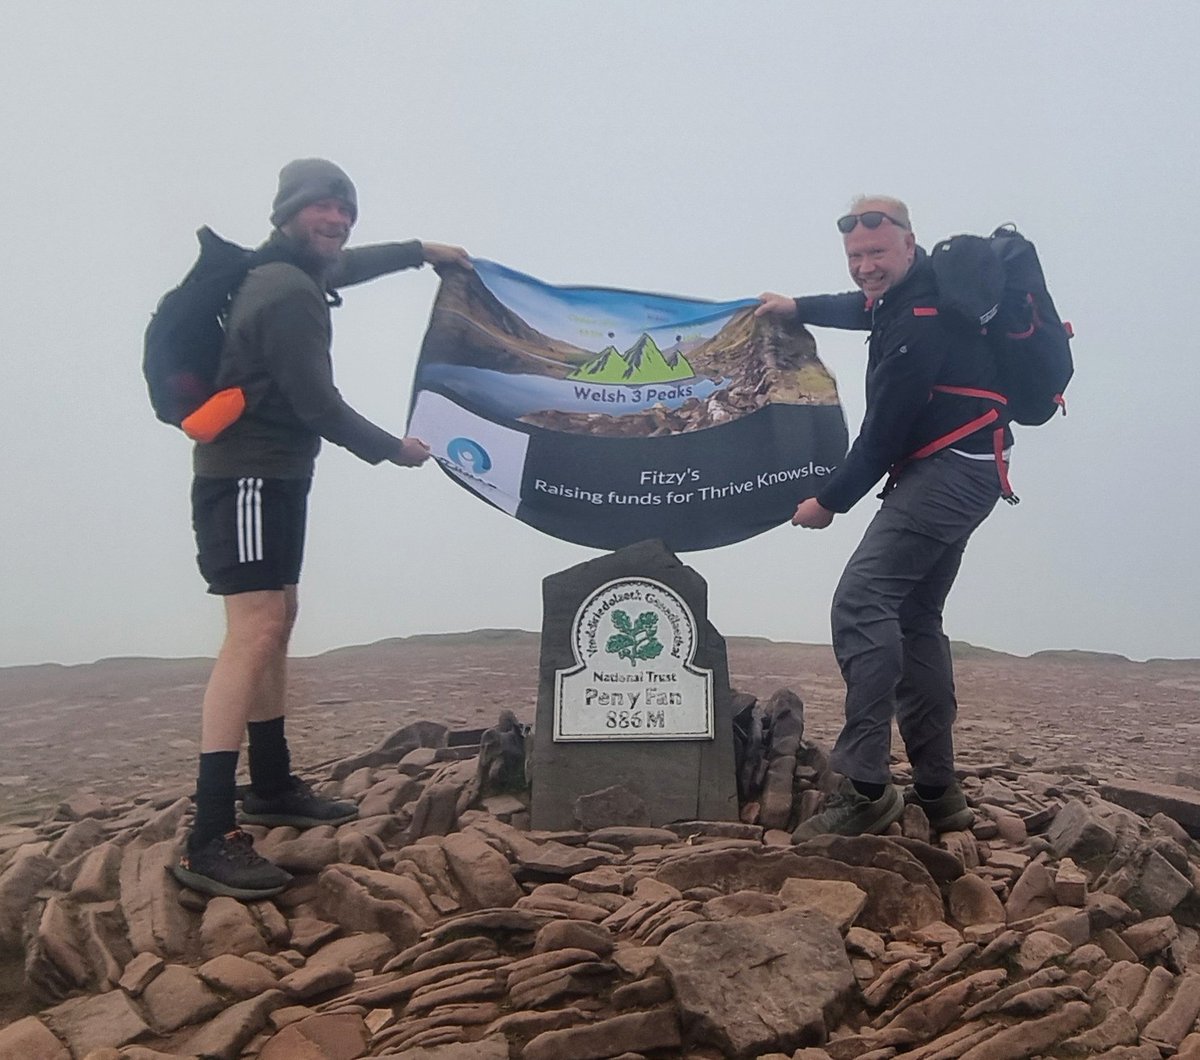 Absolute belter of a day yesterday. Tough going at times but was worth it for a good cause 👇

gofund.me/8d0d83b0

#Knowsley #Liverpool #welshthreepeakchallenge